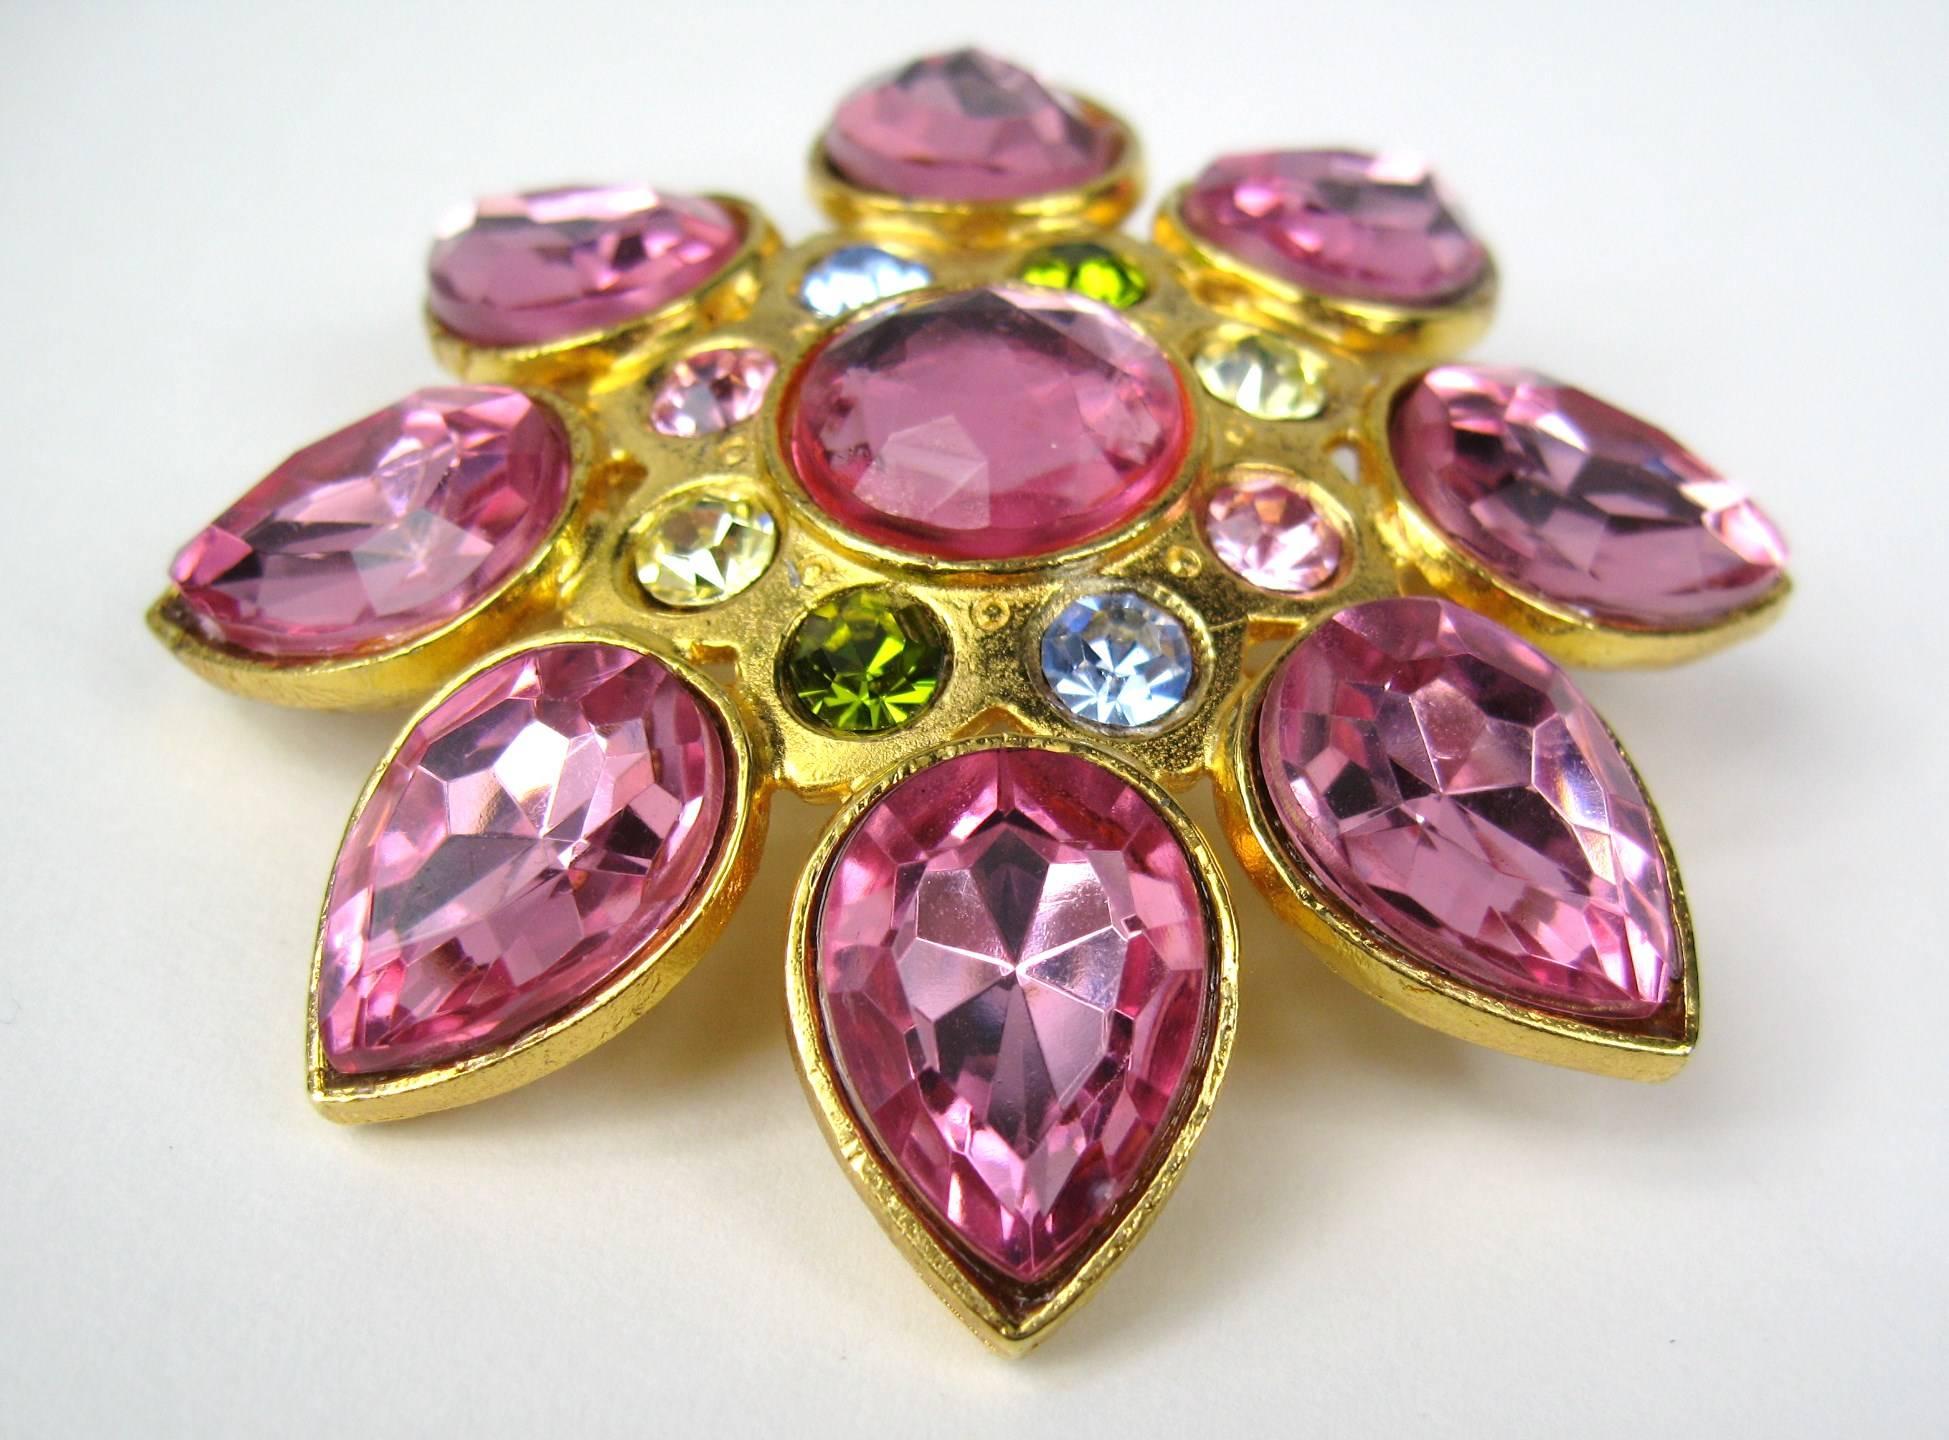 Vintage 1980's R.J. GRAZIANO Gold Tone Massive Pink/ Green Blue Floral Brooch Measures 2.75 inches. This is out of a massive collection of Costume Jewelry, Hopi, Zuni, Navajo, Southwestern and sterling silver jewelry from one collector that was